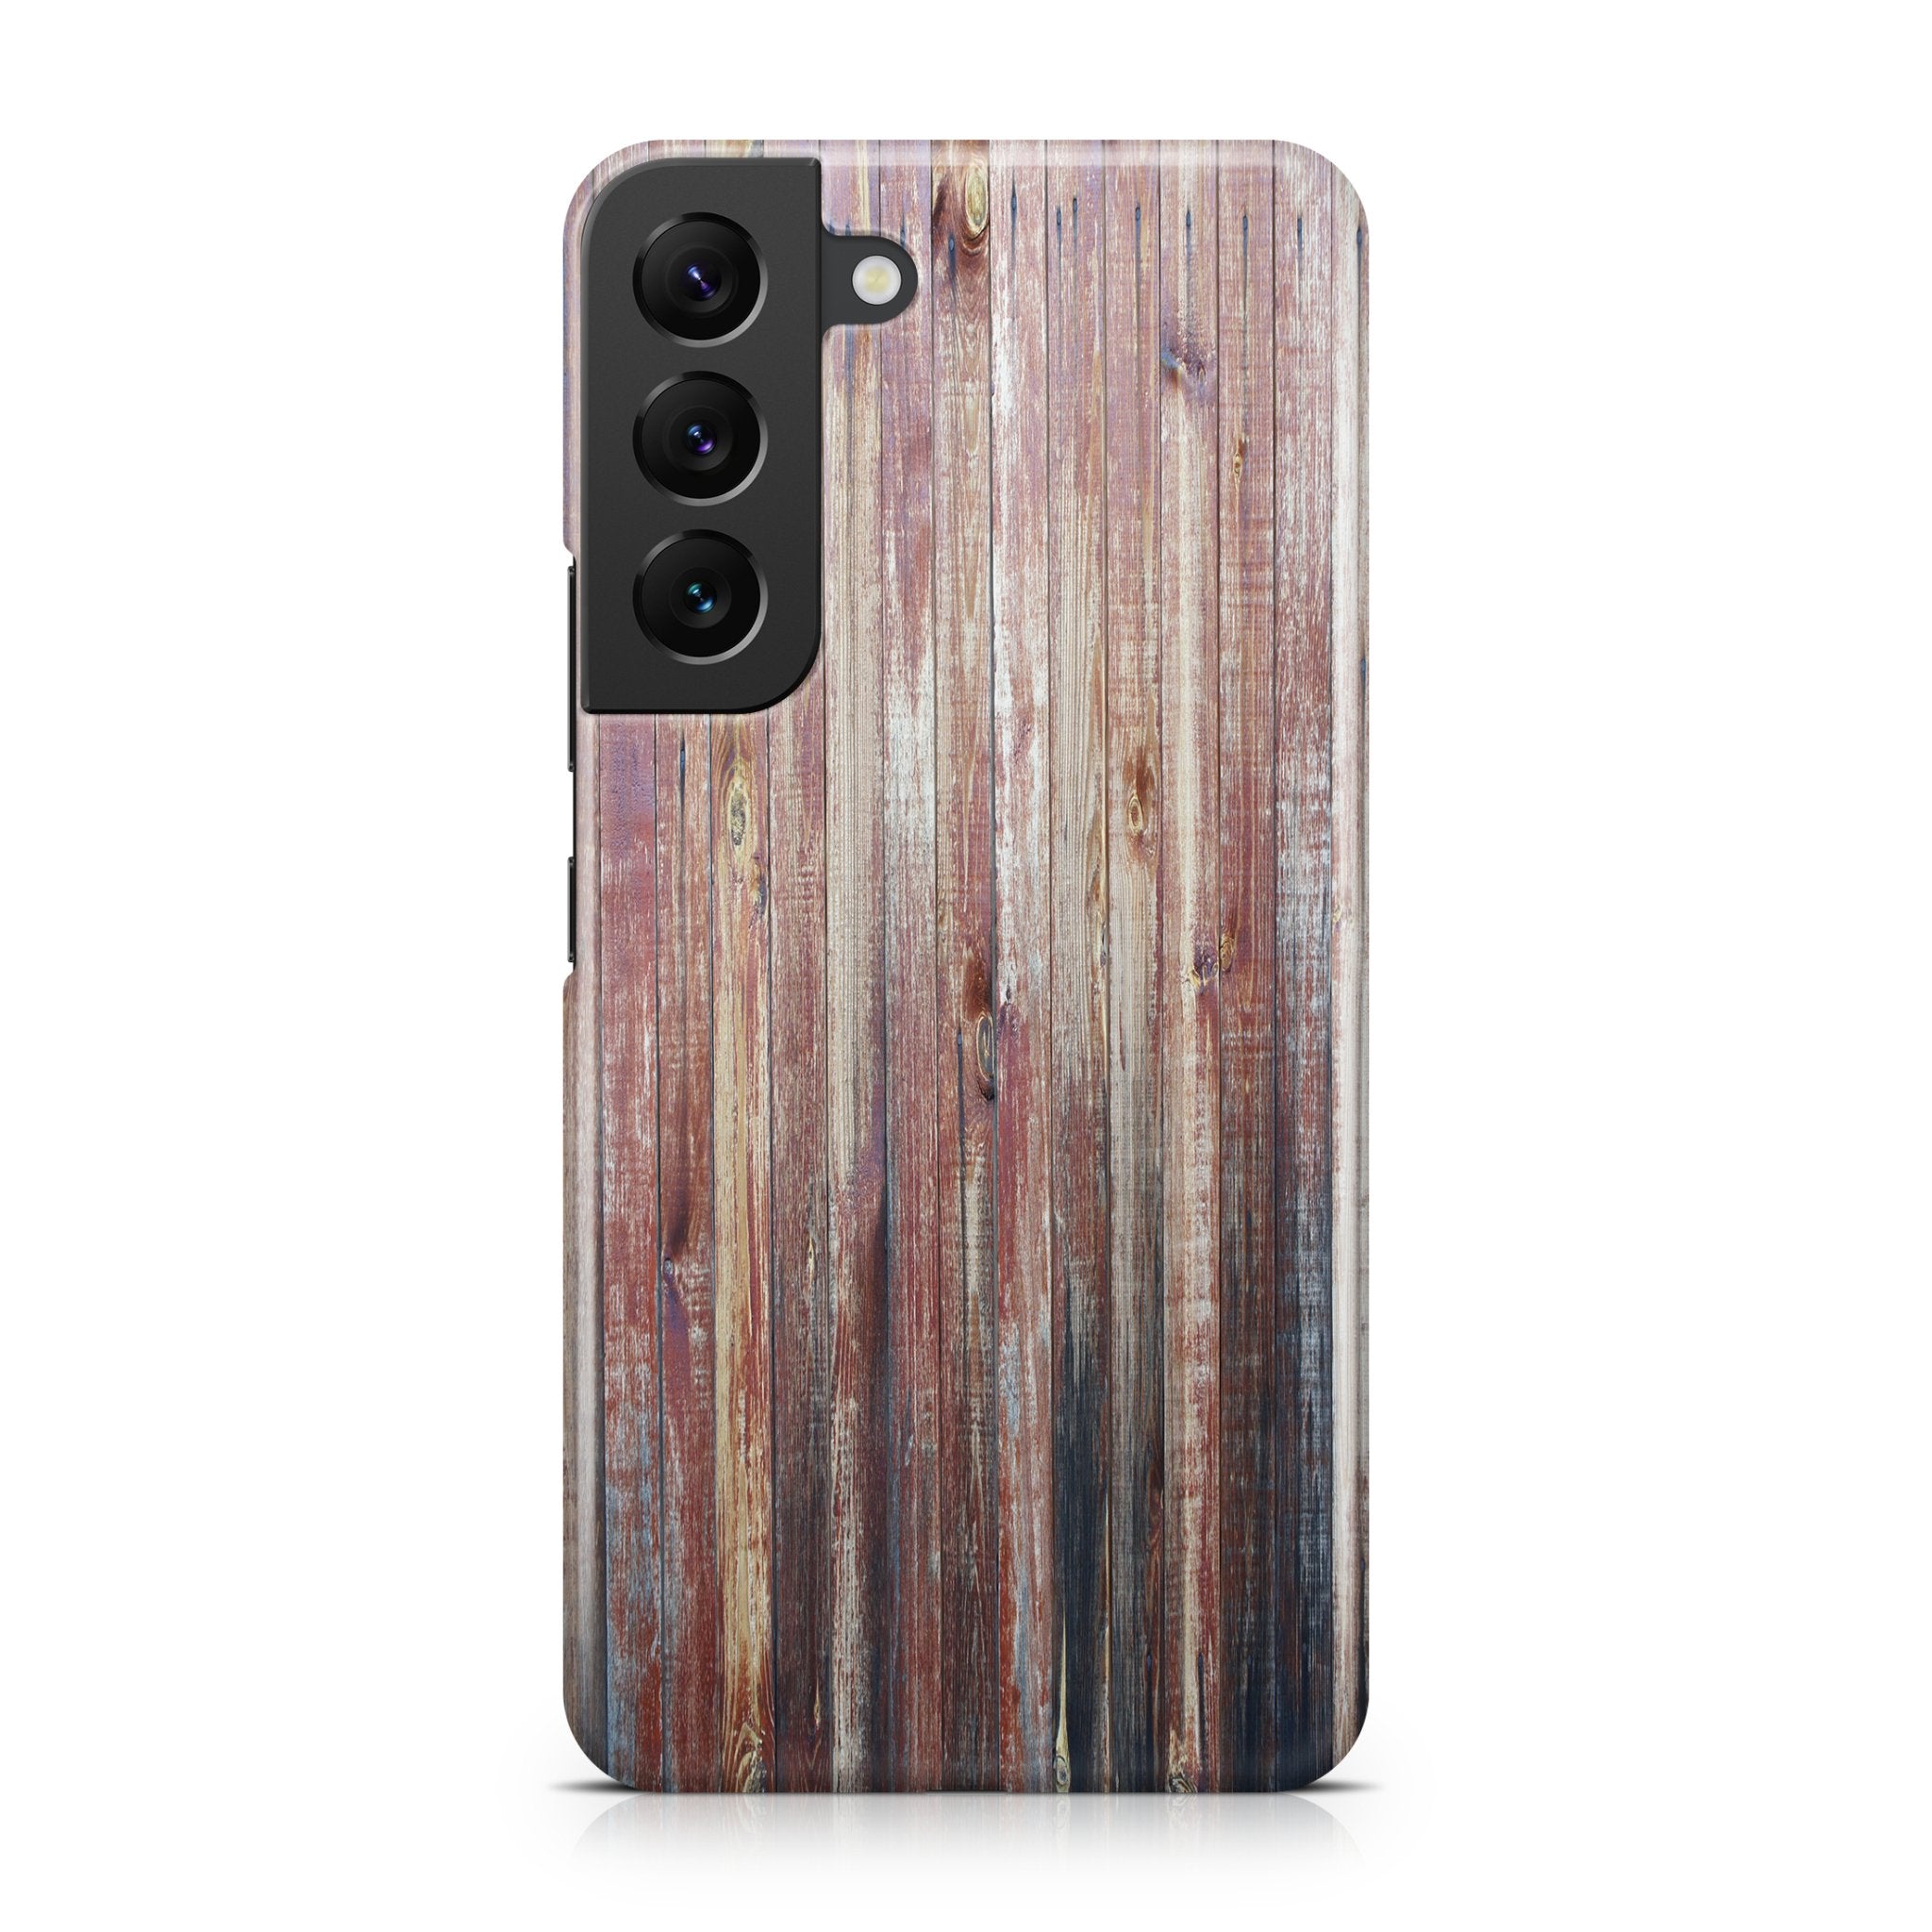 Vintage Stressed Boards - Samsung phone case designs by CaseSwagger